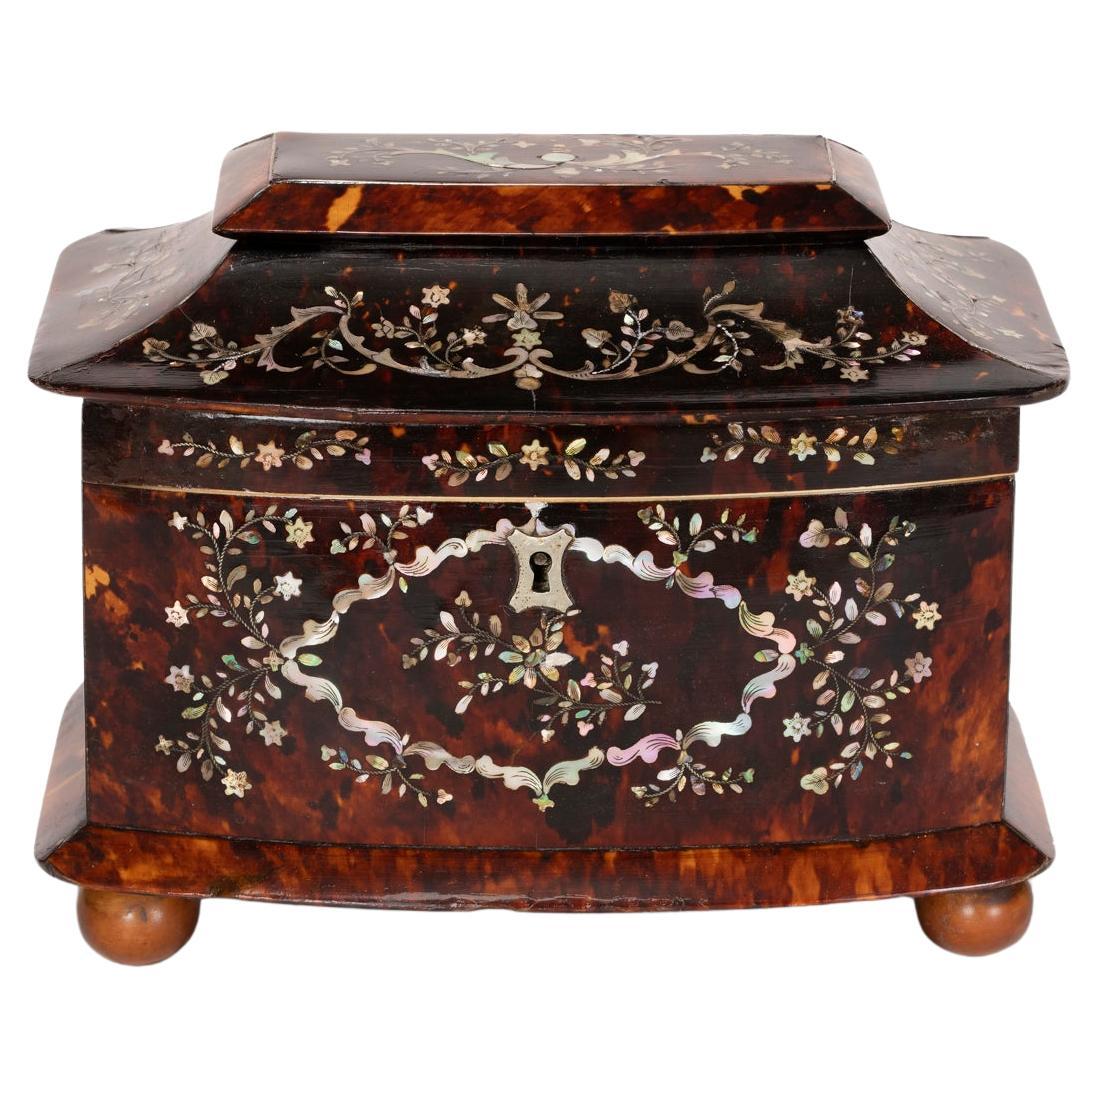 "Tea Caddy" English Tortoise Shell & Mother-of-Pearl Double Compartment 19th-c.